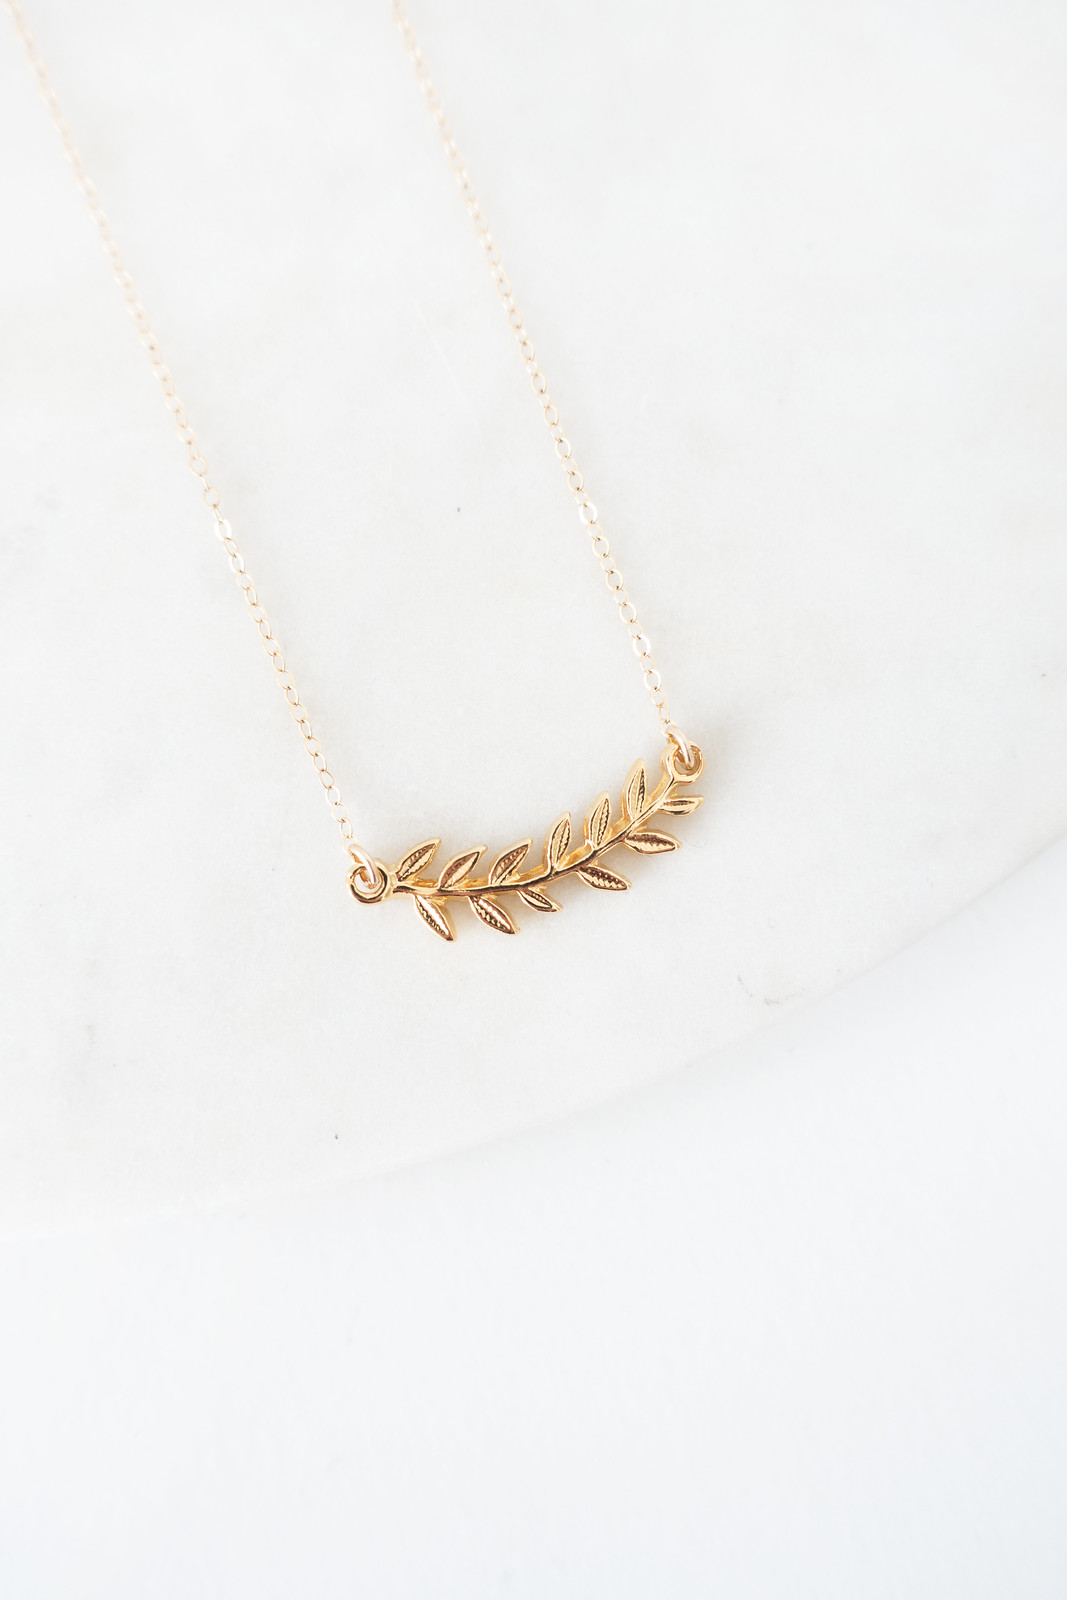 Mother's Day Jewellery Favourites